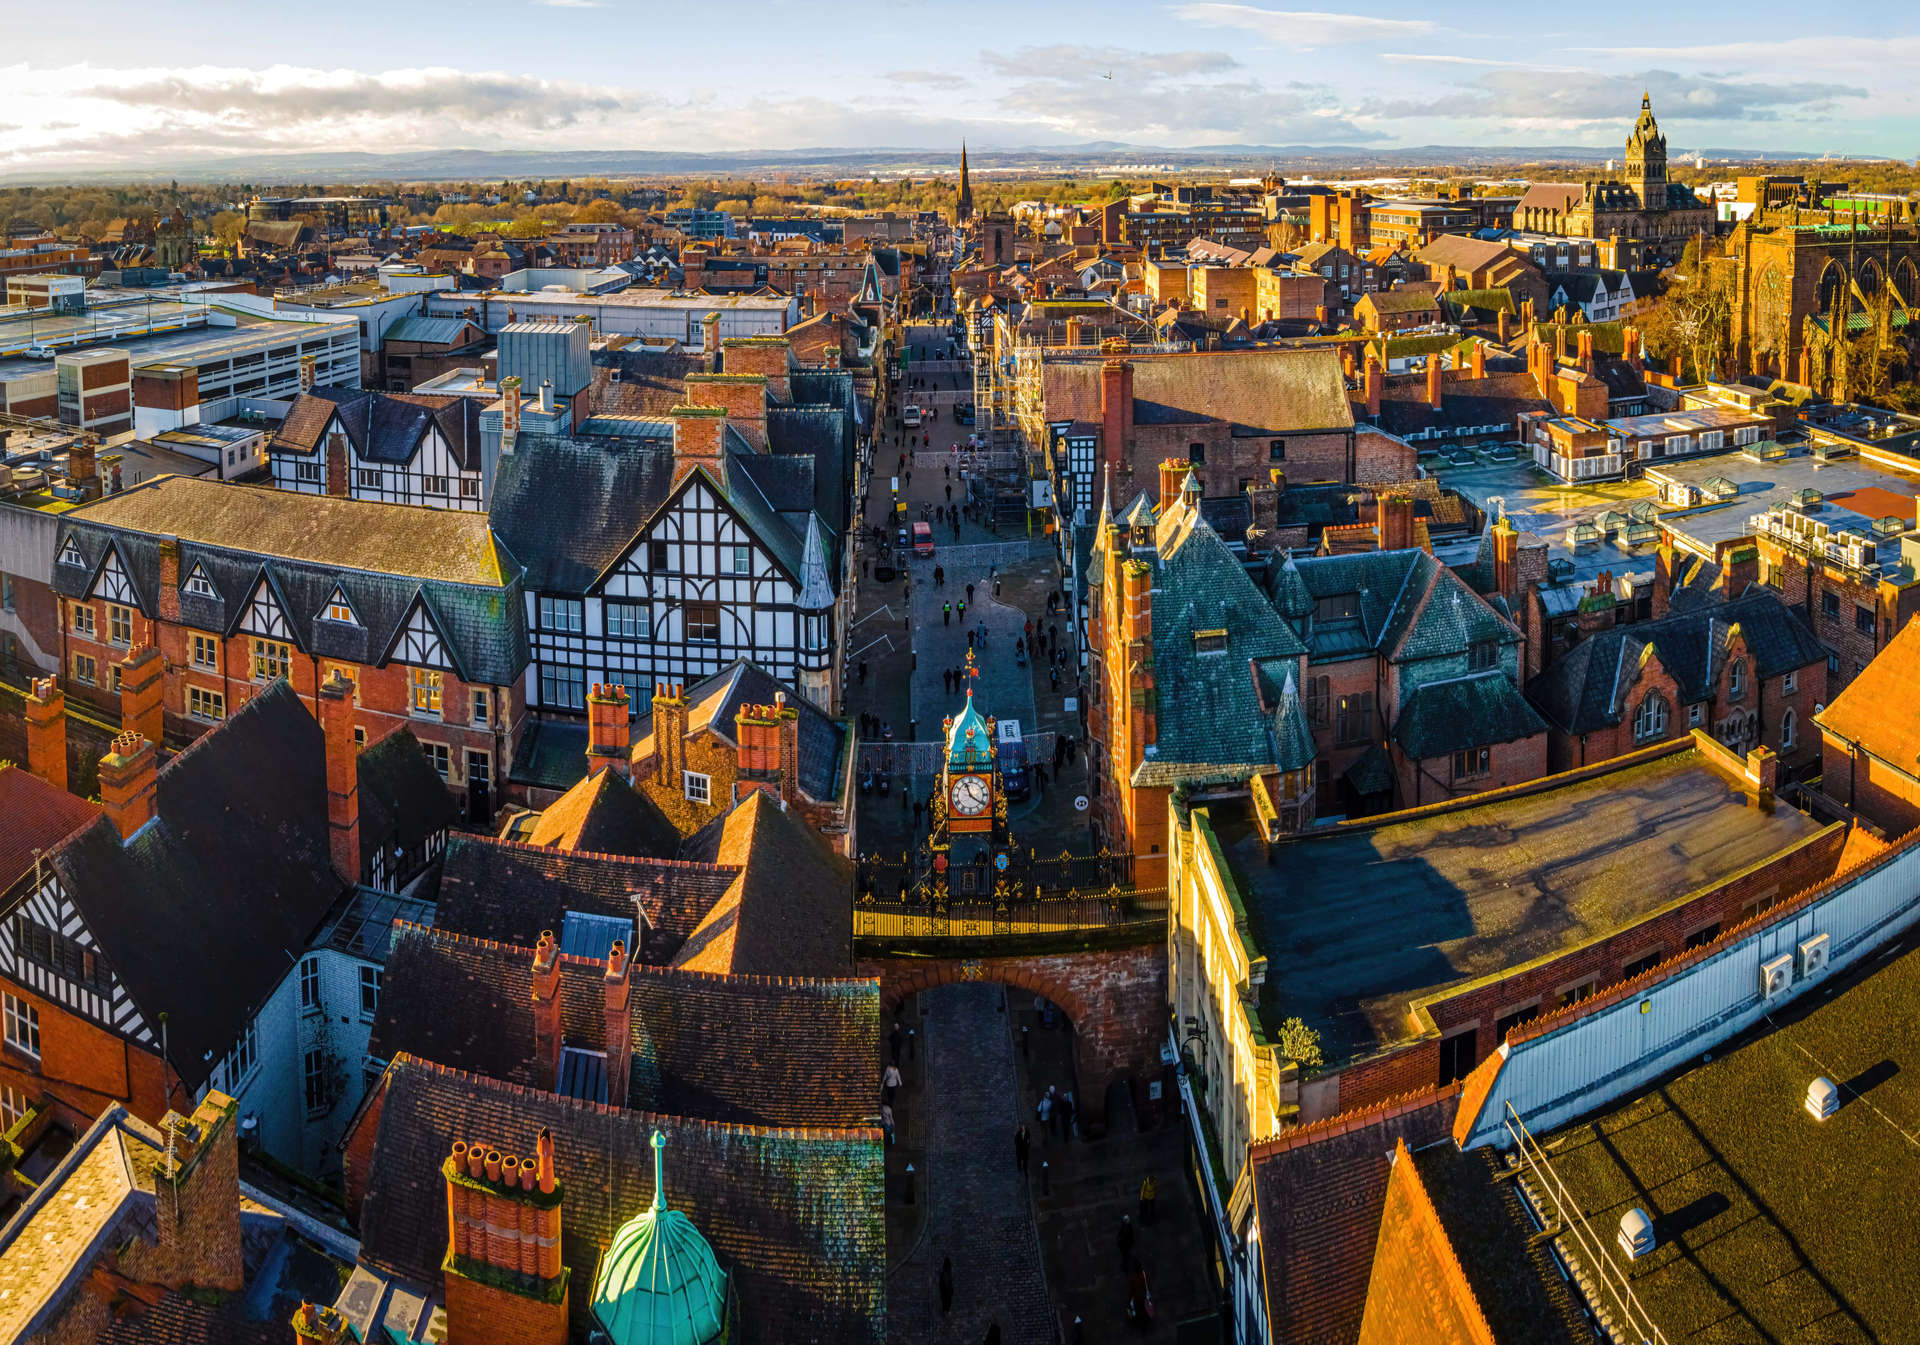 Aerial view of Chester, a city in northwest England, known for its extensive Roman walls made of local red sandstone